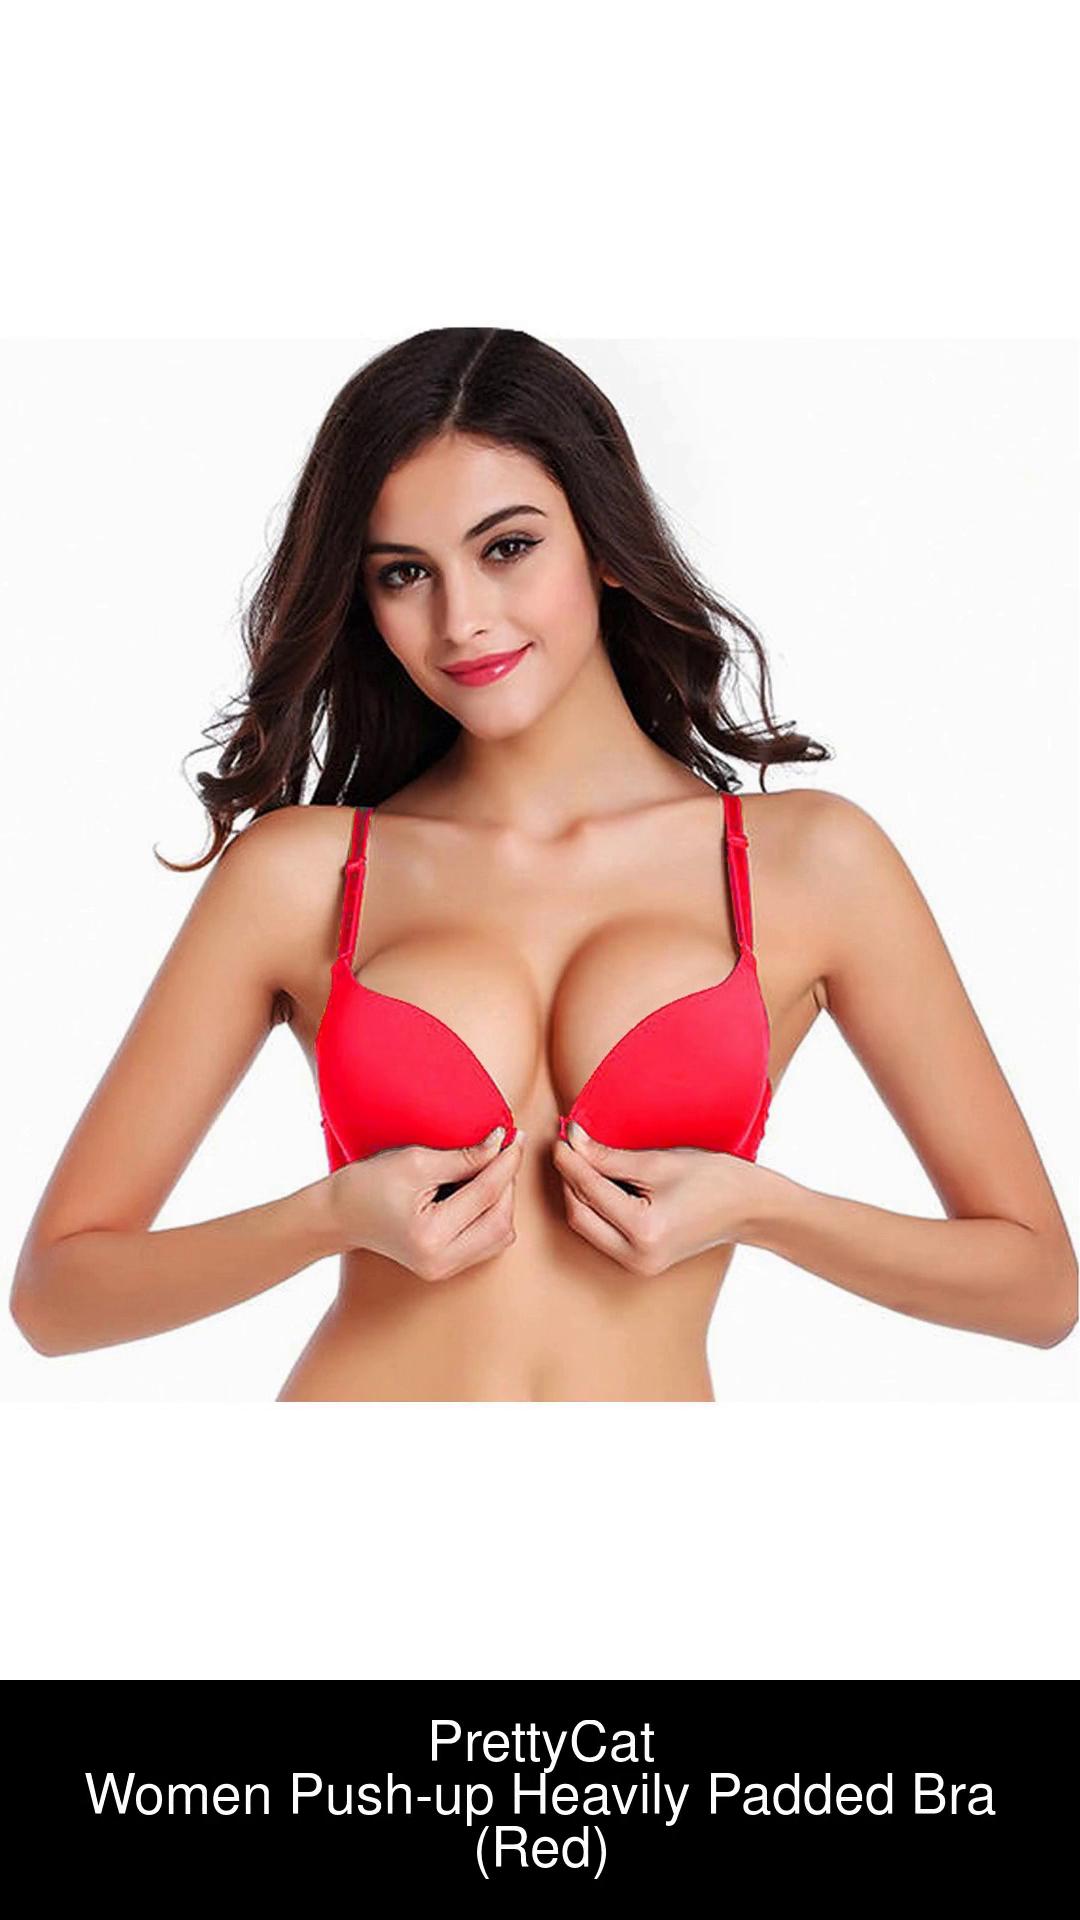 PrettyCat Perfect Women Push-up Heavily Padded Bra - Buy Red PrettyCat  Perfect Women Push-up Heavily Padded Bra Online at Best Prices in India